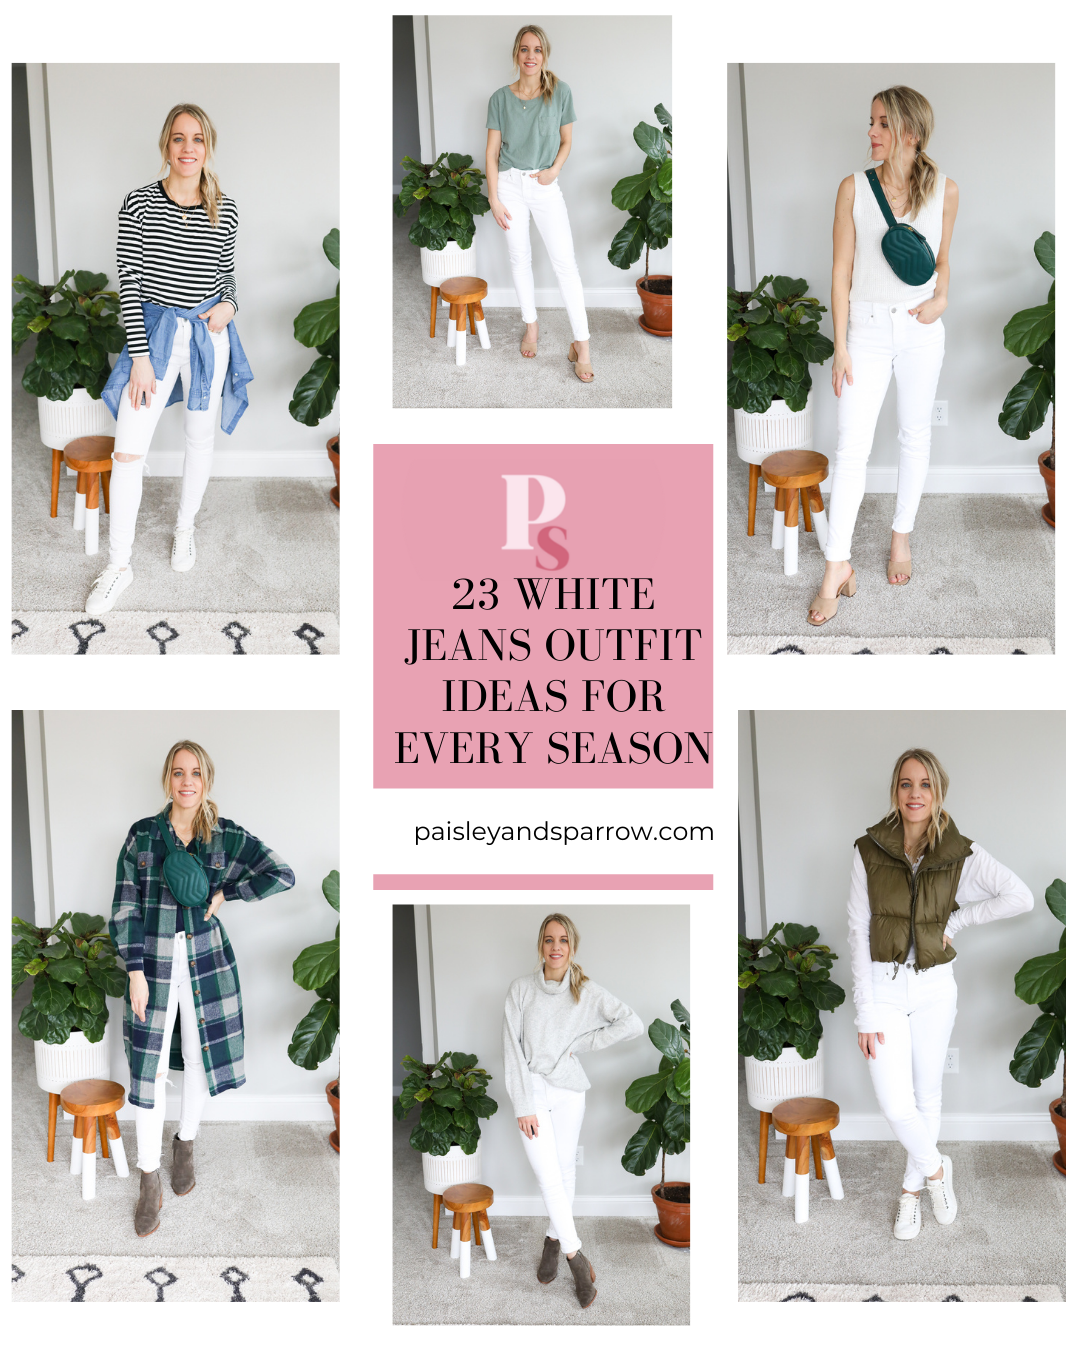 23 White Jeans Outfit Ideas for Every Season!